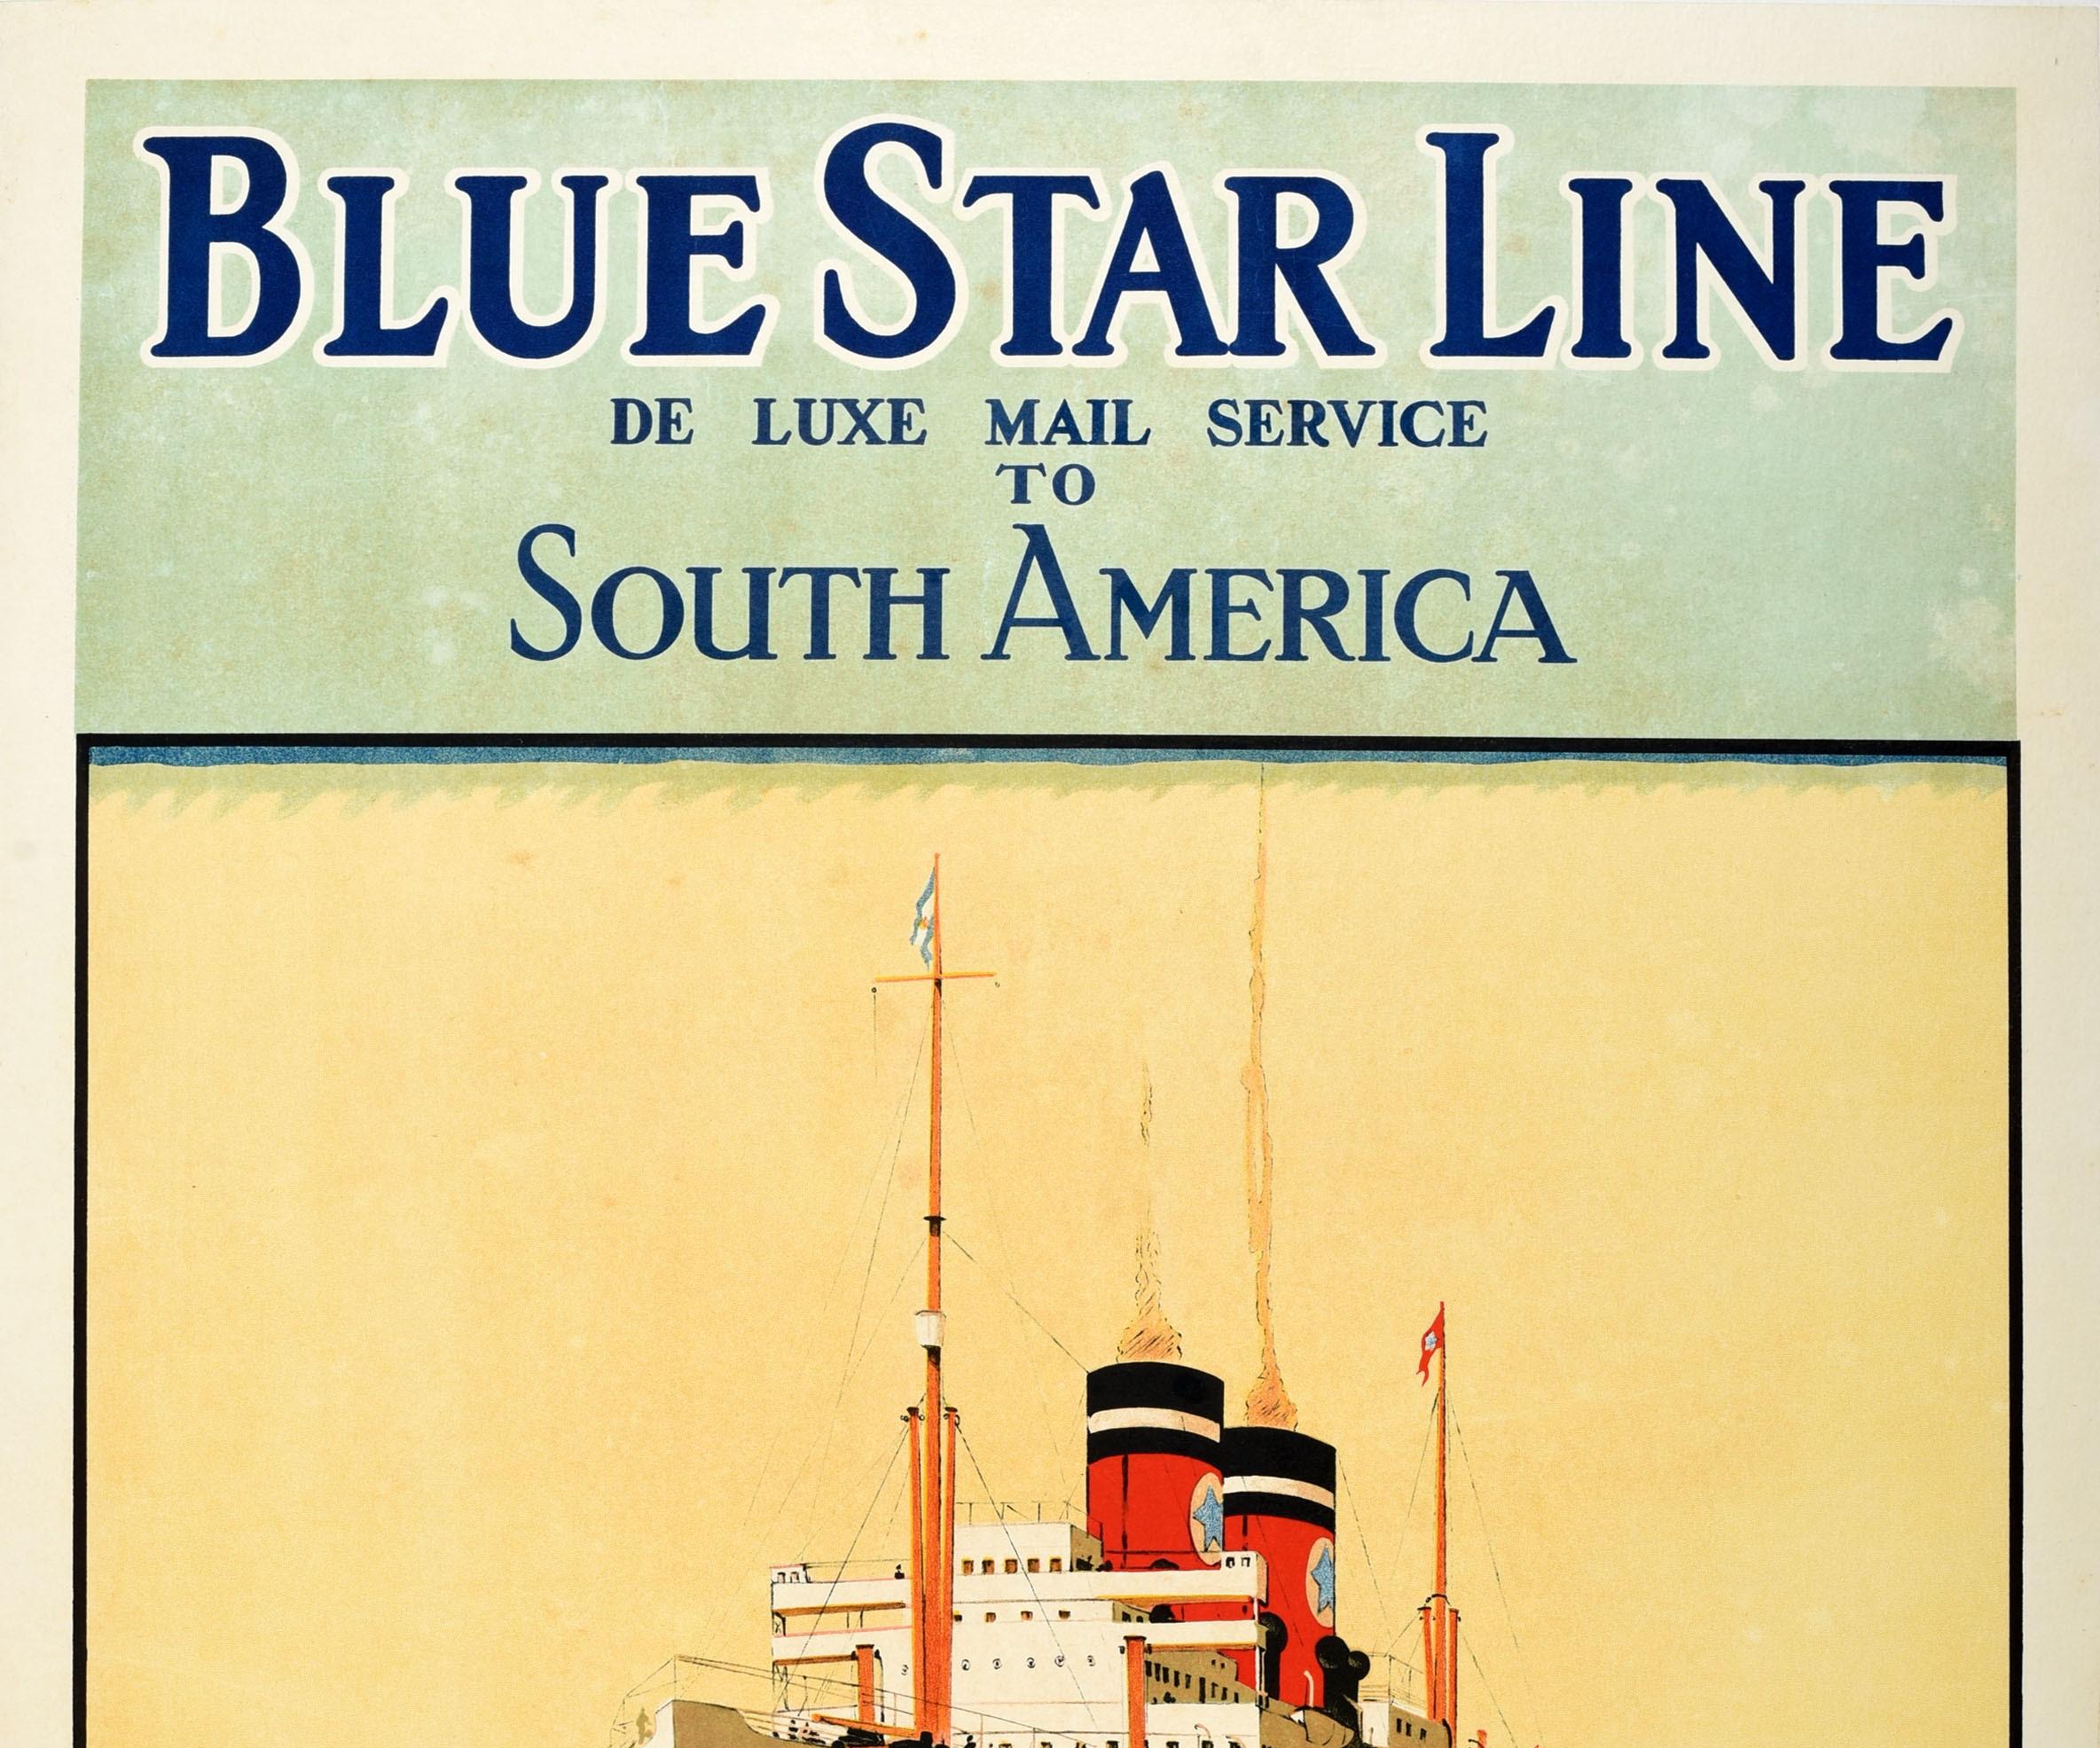 Original vintage cruise ship travel poster advertising Blue Star Line De Luxe Mail Service to South America calling at Boulogne, Lisbon, Madeira, Teneriffe (Tenerife), Rio de Janeiro, Santos, Montevideo and Buenos Aires First class passengers only.